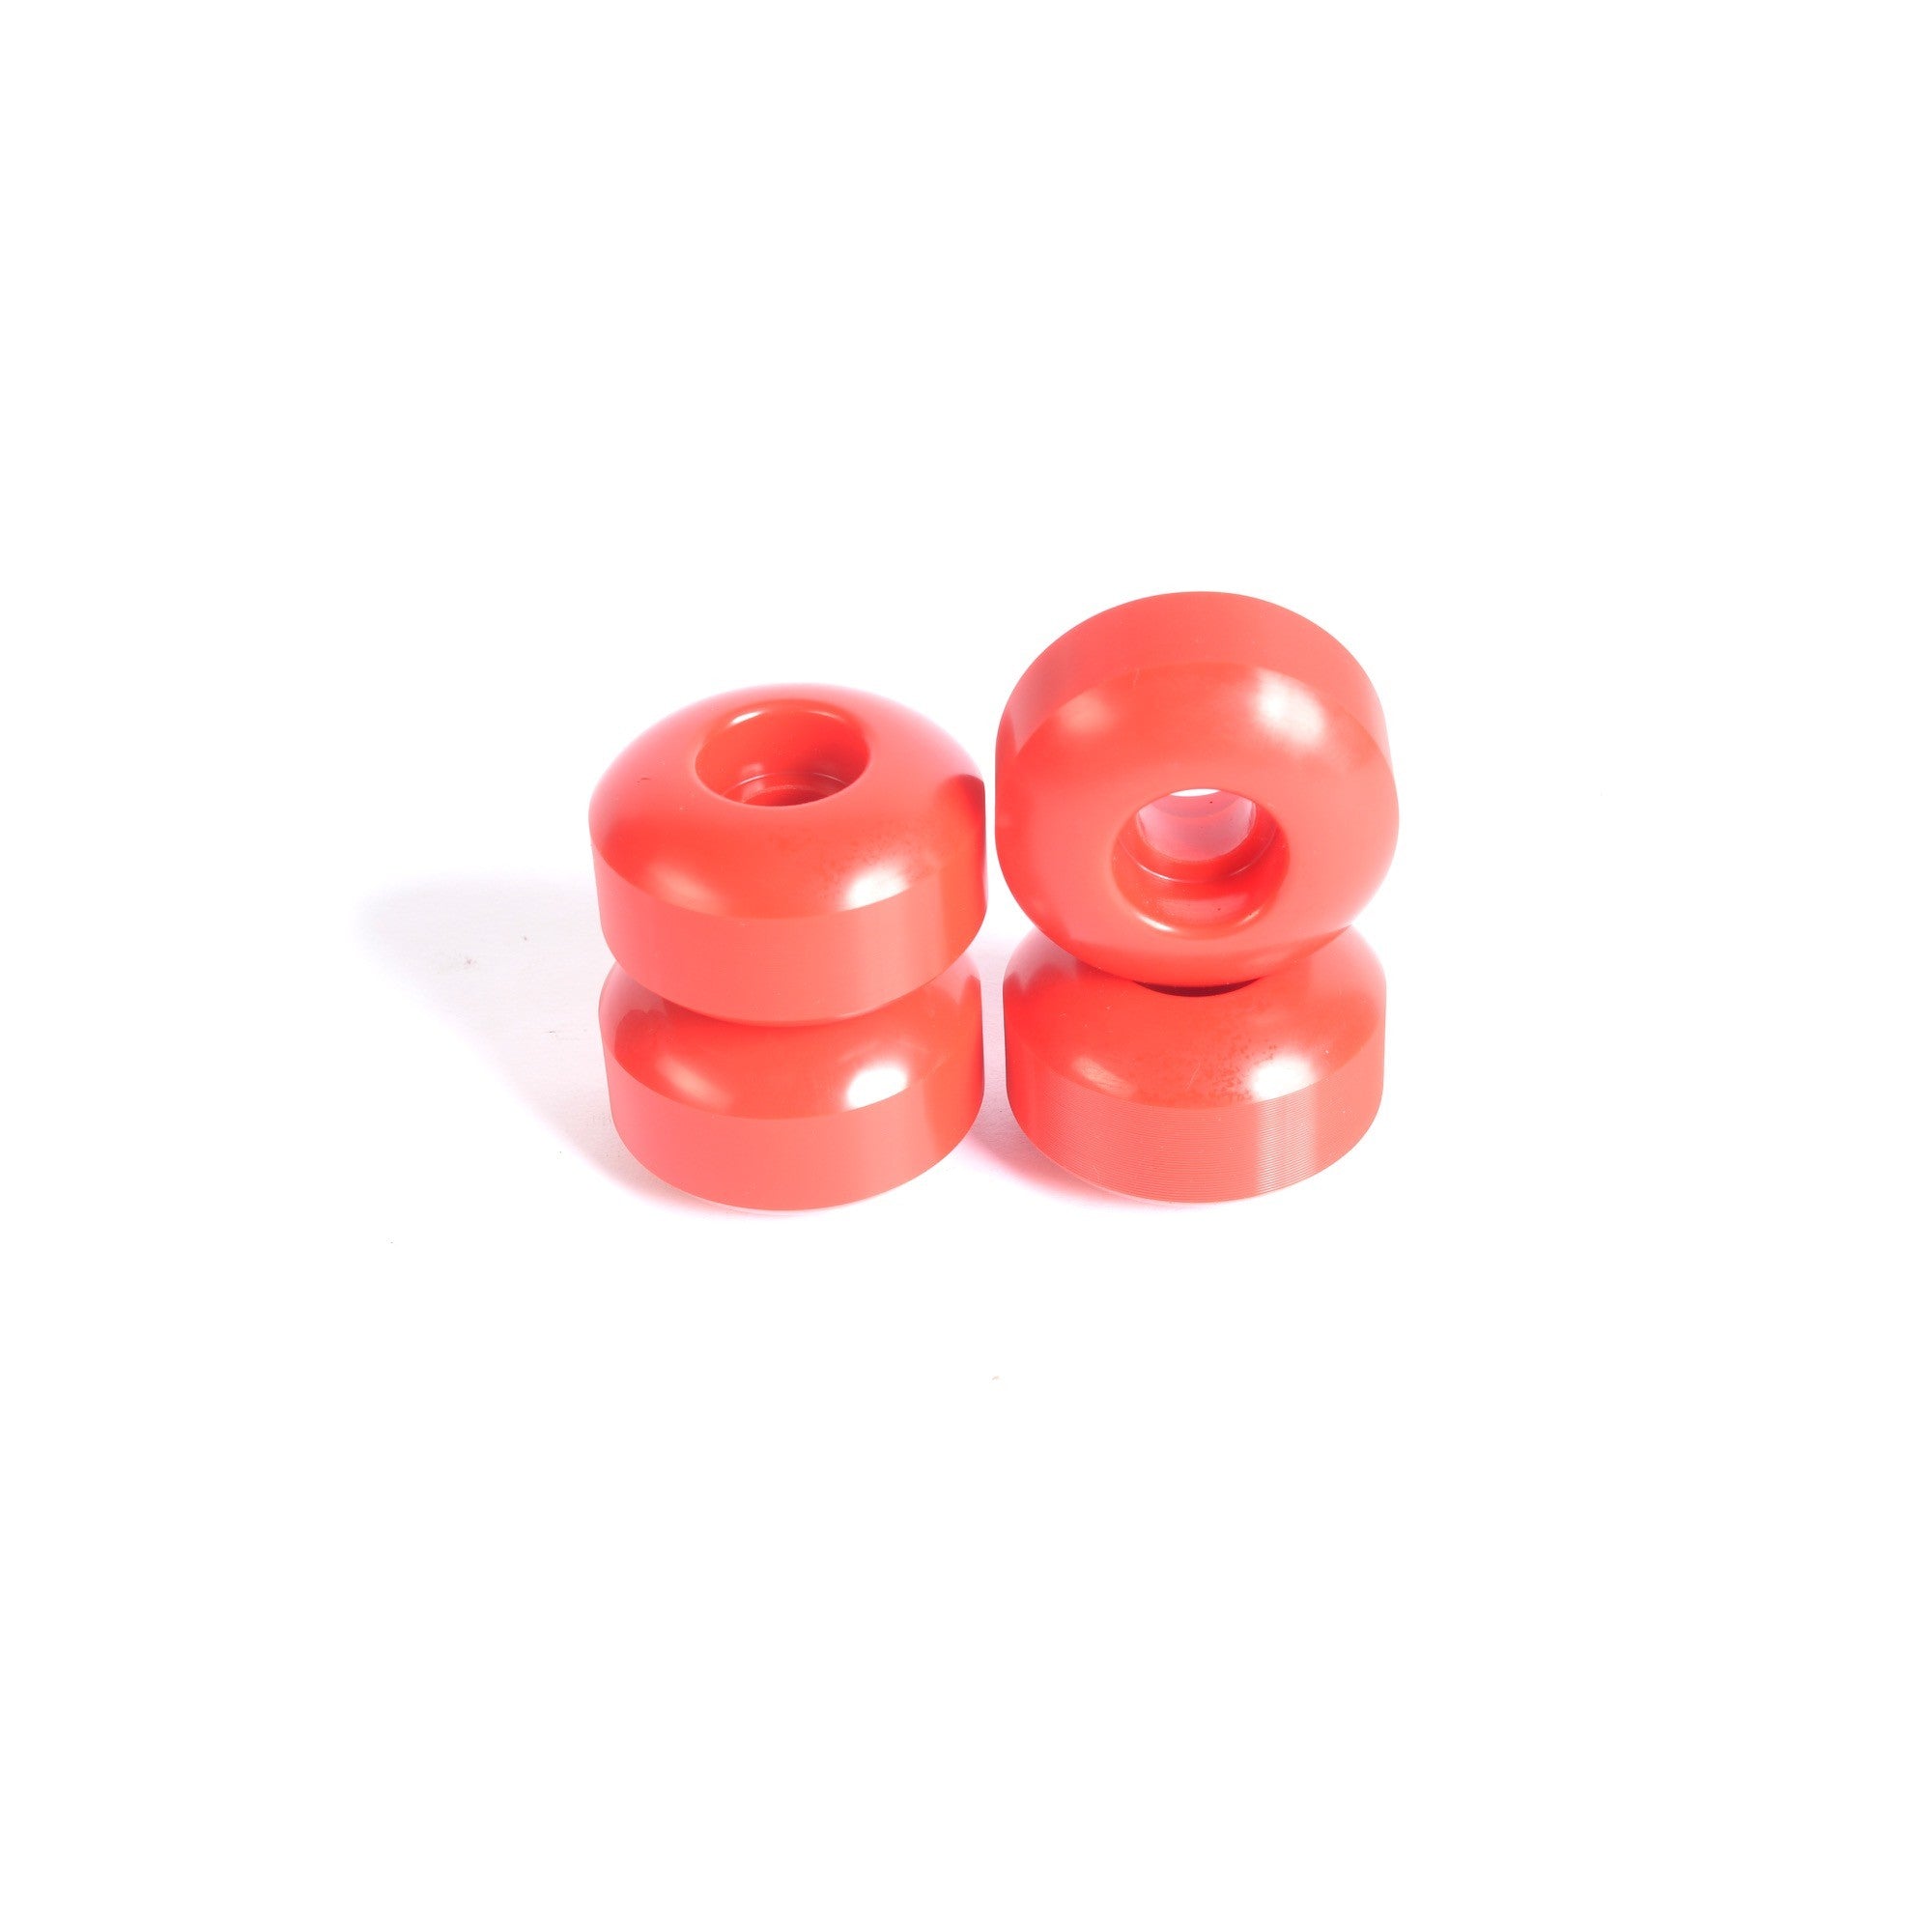 Skateboard wheels - YOCAHER 52x30mm 99a - Red